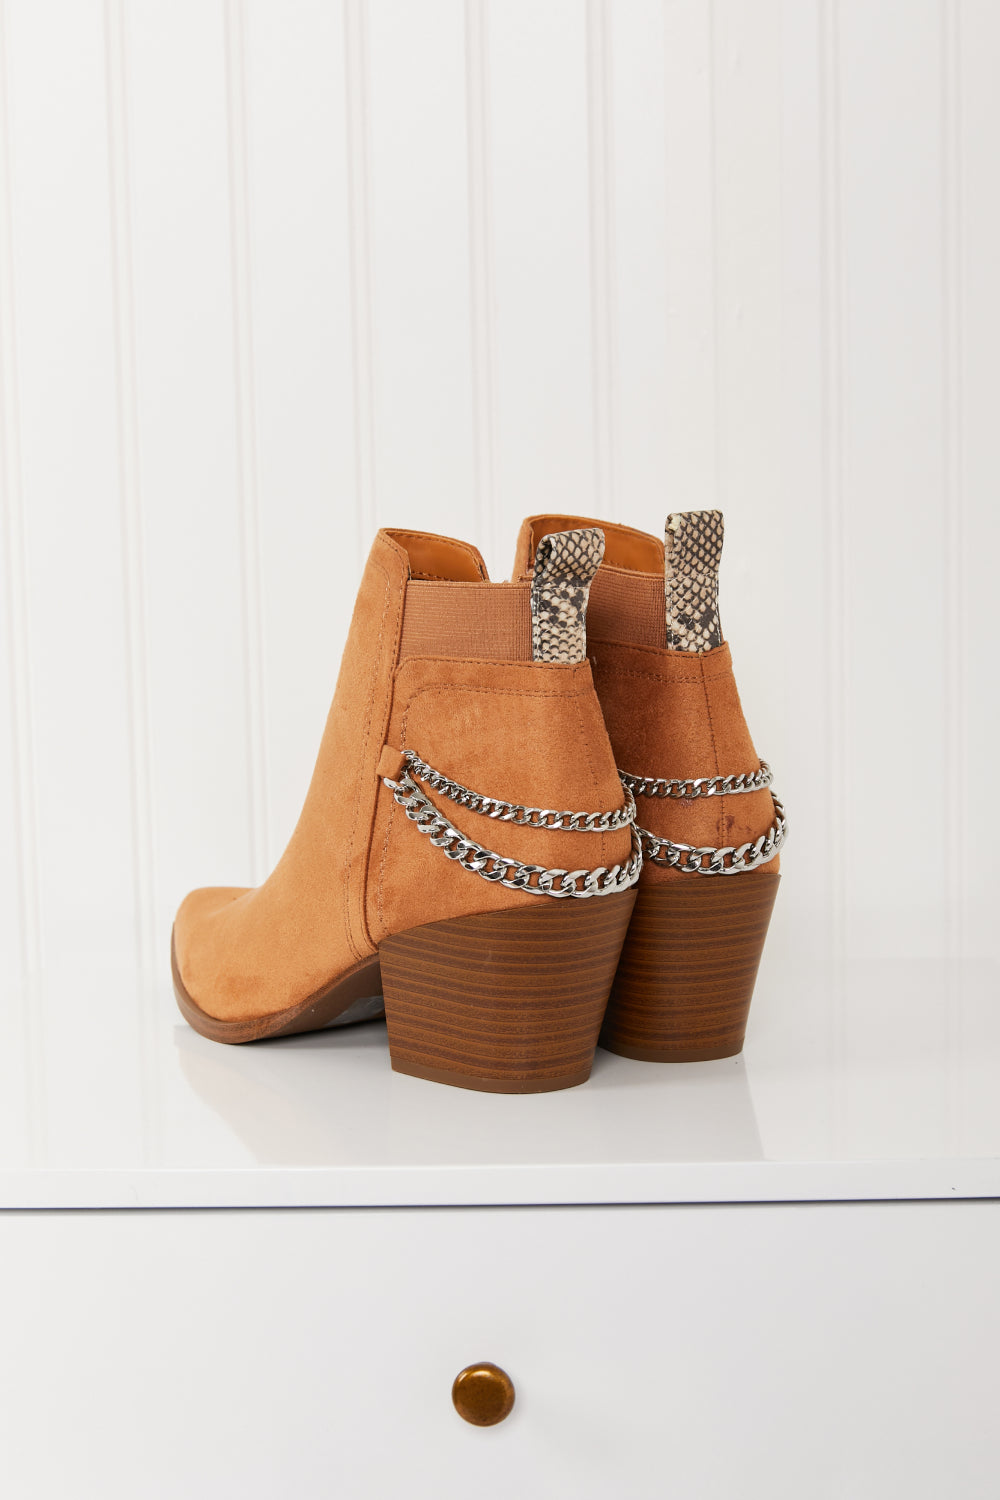 Fortune Dynamic Westside Pointed Toe Chain Detail Ankle Booties